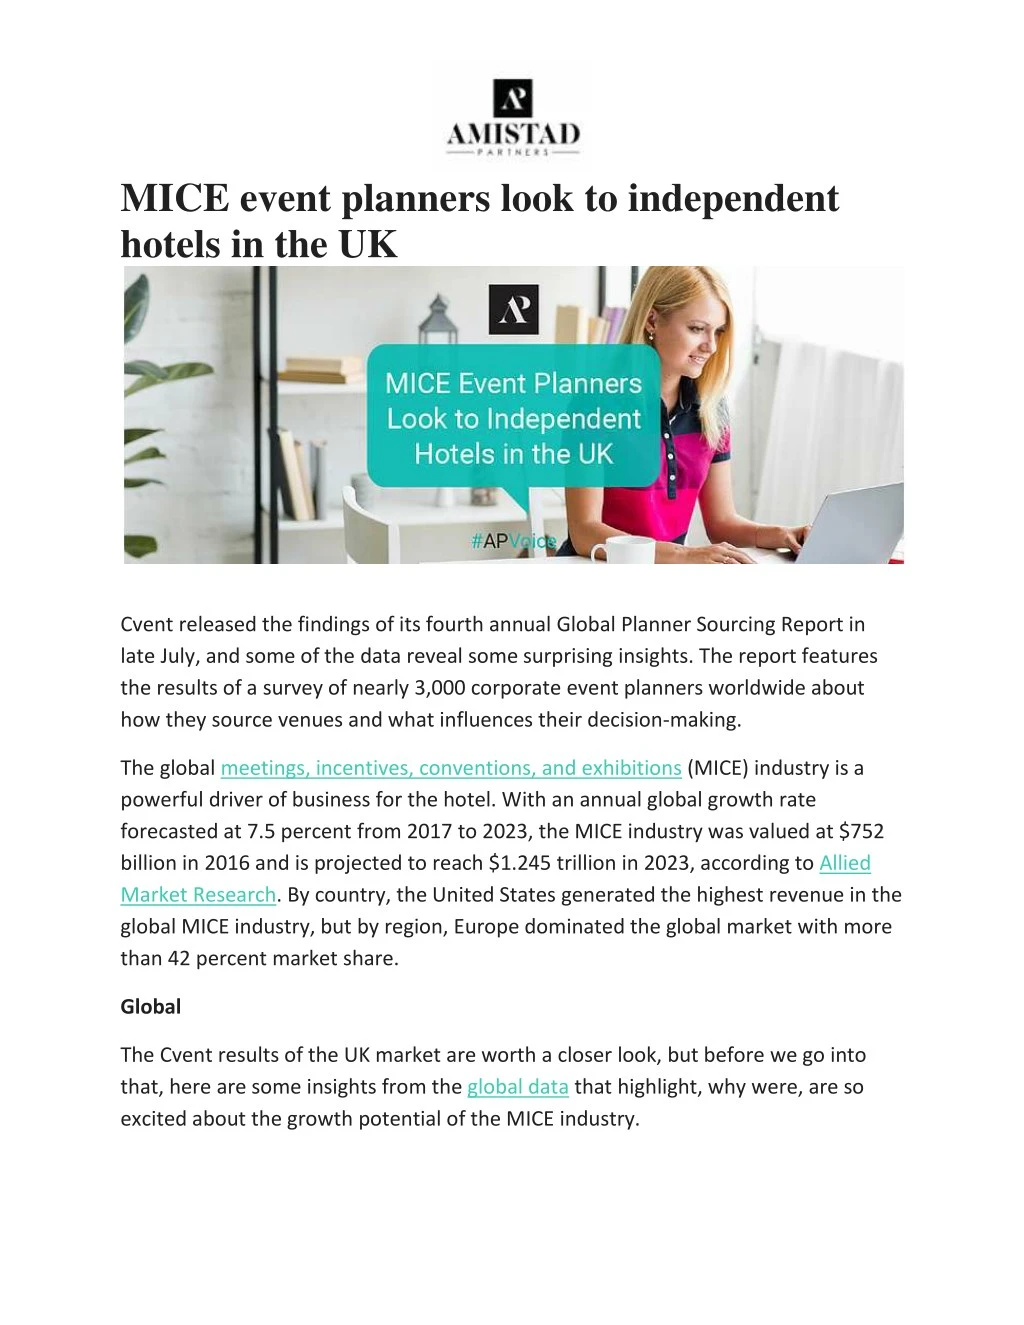 mice event planners look to independent hotels